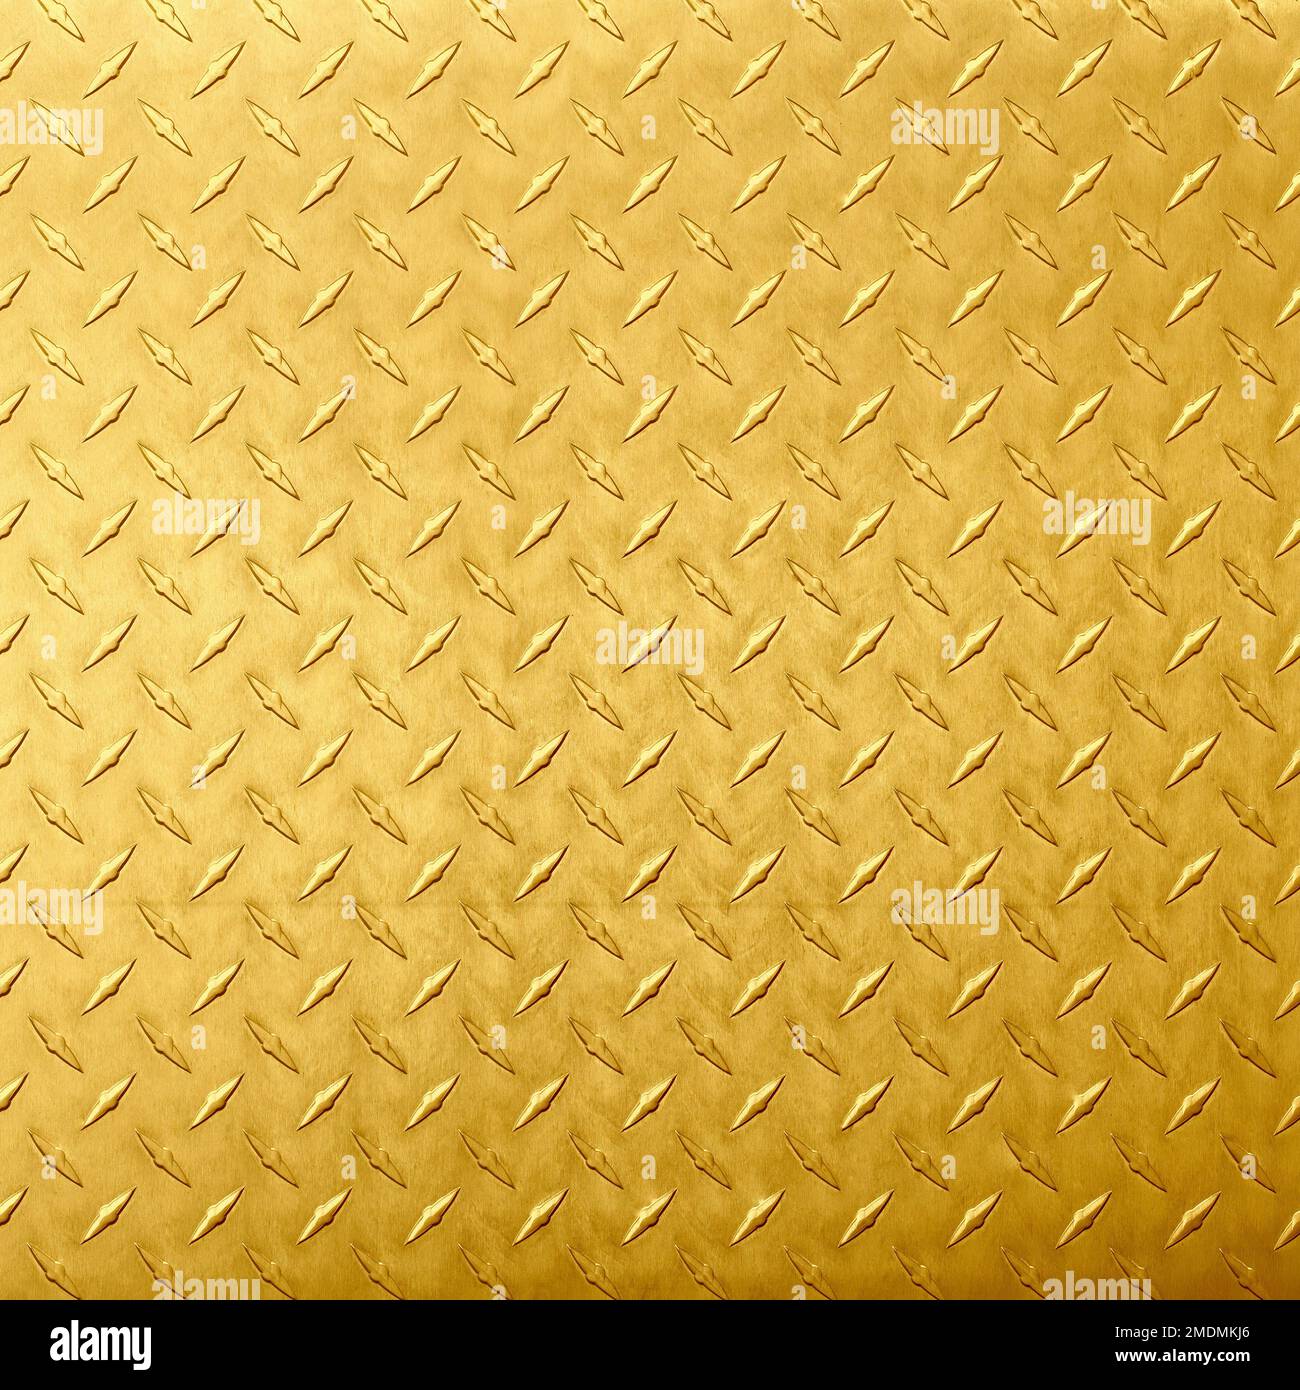 Abstract brass texture Stock Photo by ©norgallery 81314552